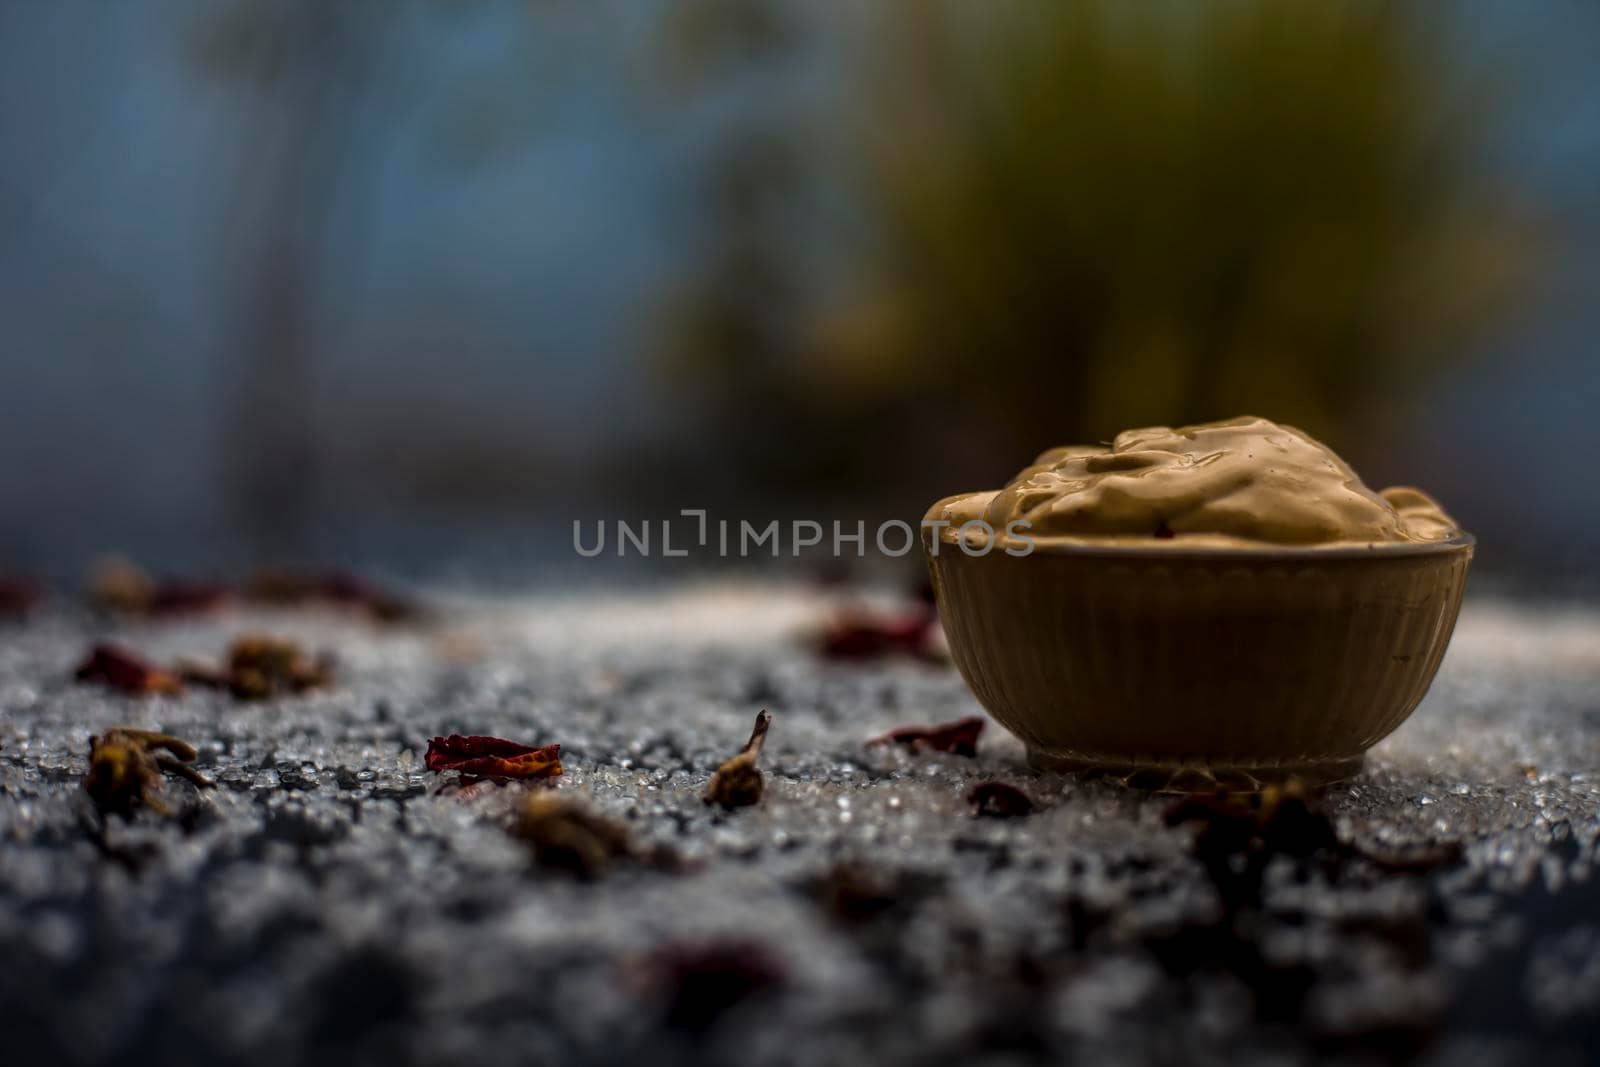 Ubtan/face mask/face pack of Multani mitti or fuller's earth on wooden surface in a glass bowl consisting of Multani mitti and coconut oil for the remedy or treatment of suntan.On the wooden surface. by mirzamlk